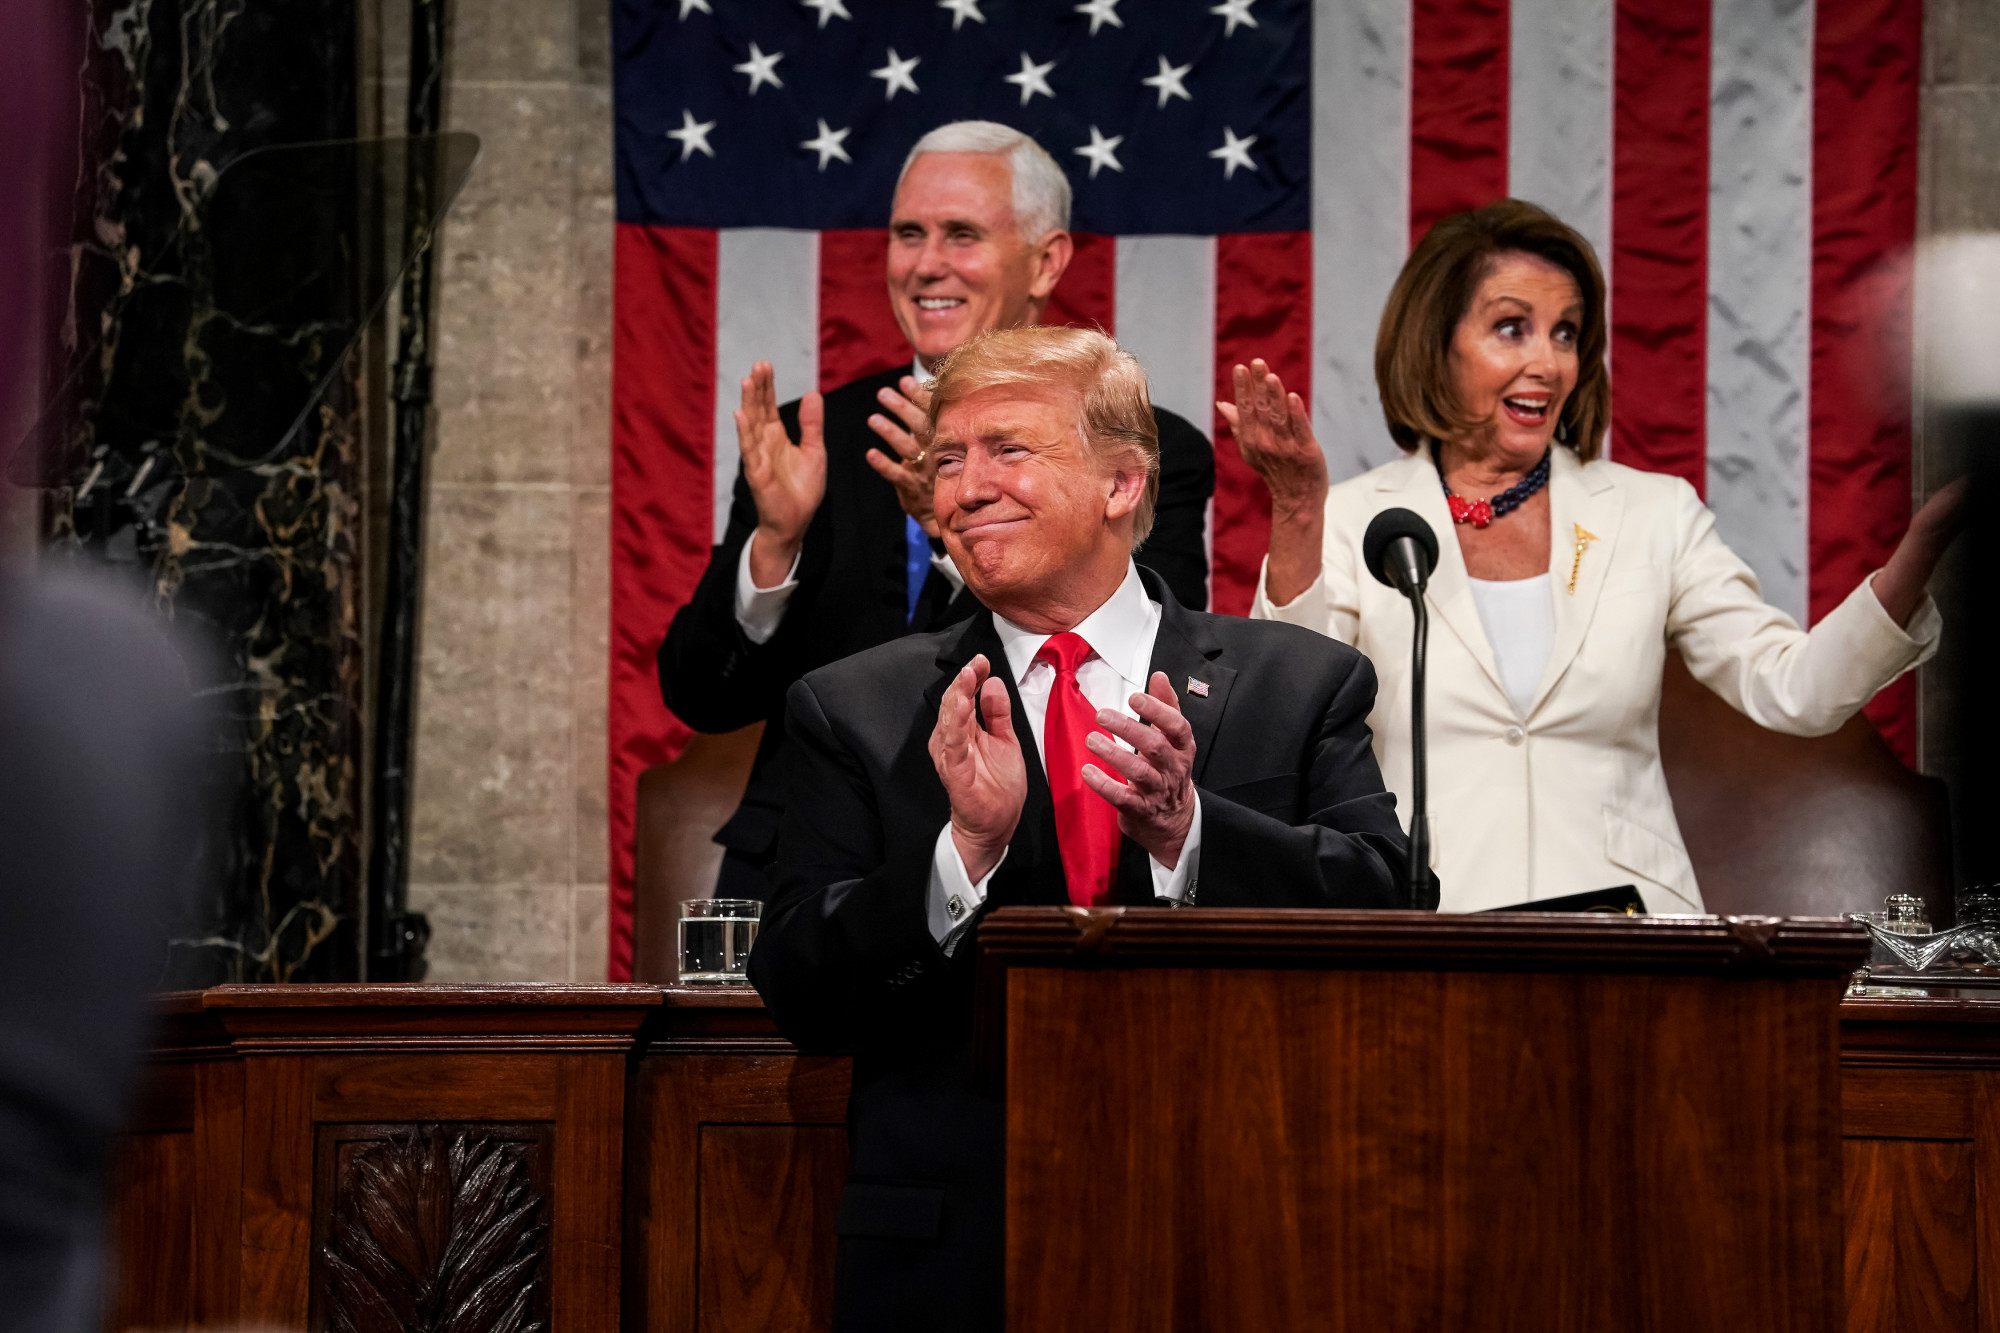 Trump to Chart a ‘Vision of Relentless Optimism’ in State of the Union Address